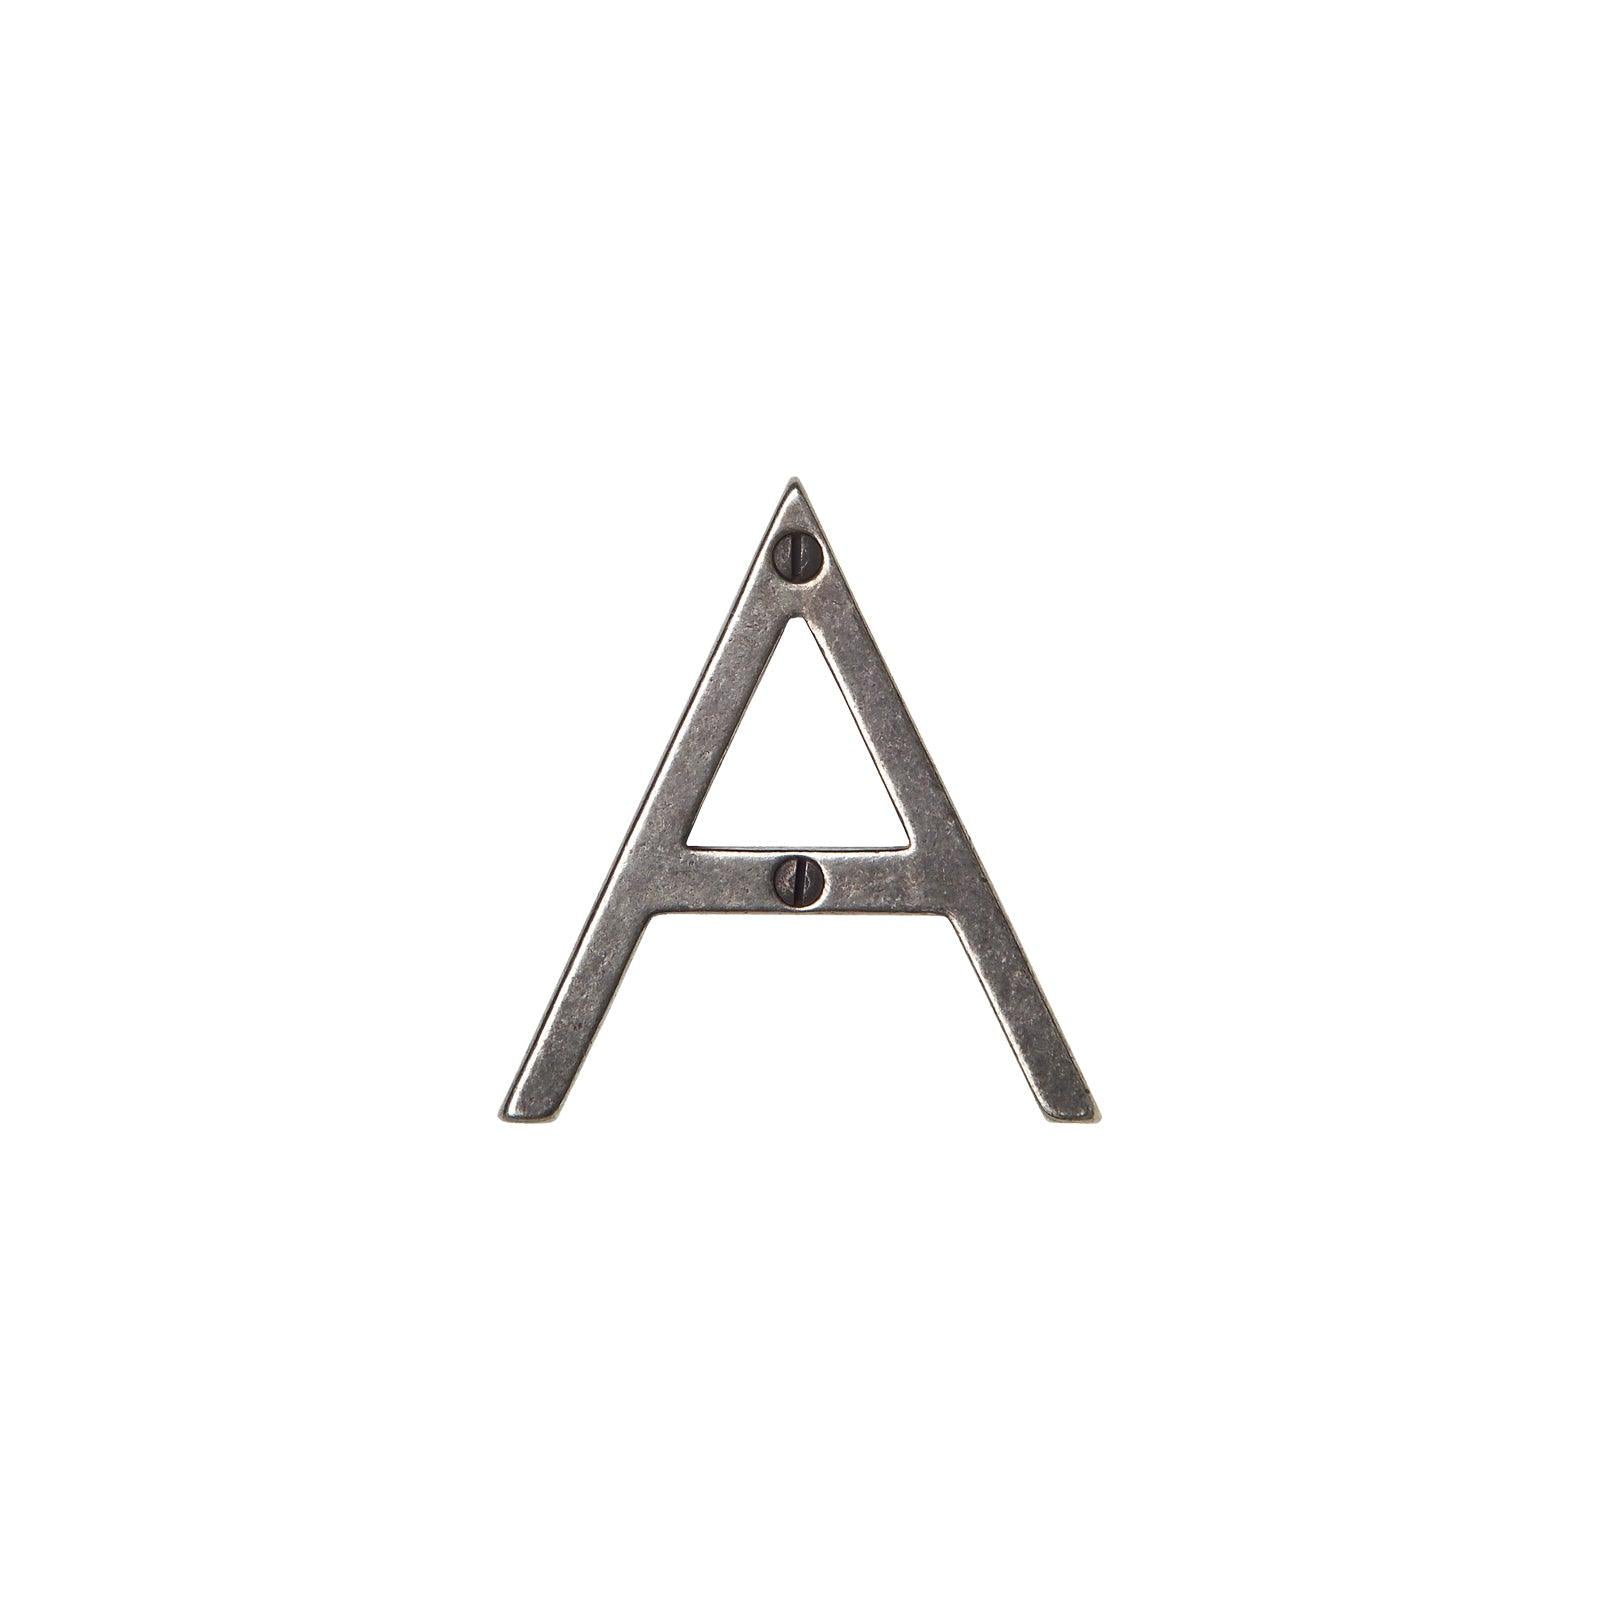 L275X - 2 3/4" House Letter “X" - Discount Rocky Mountain Hardware